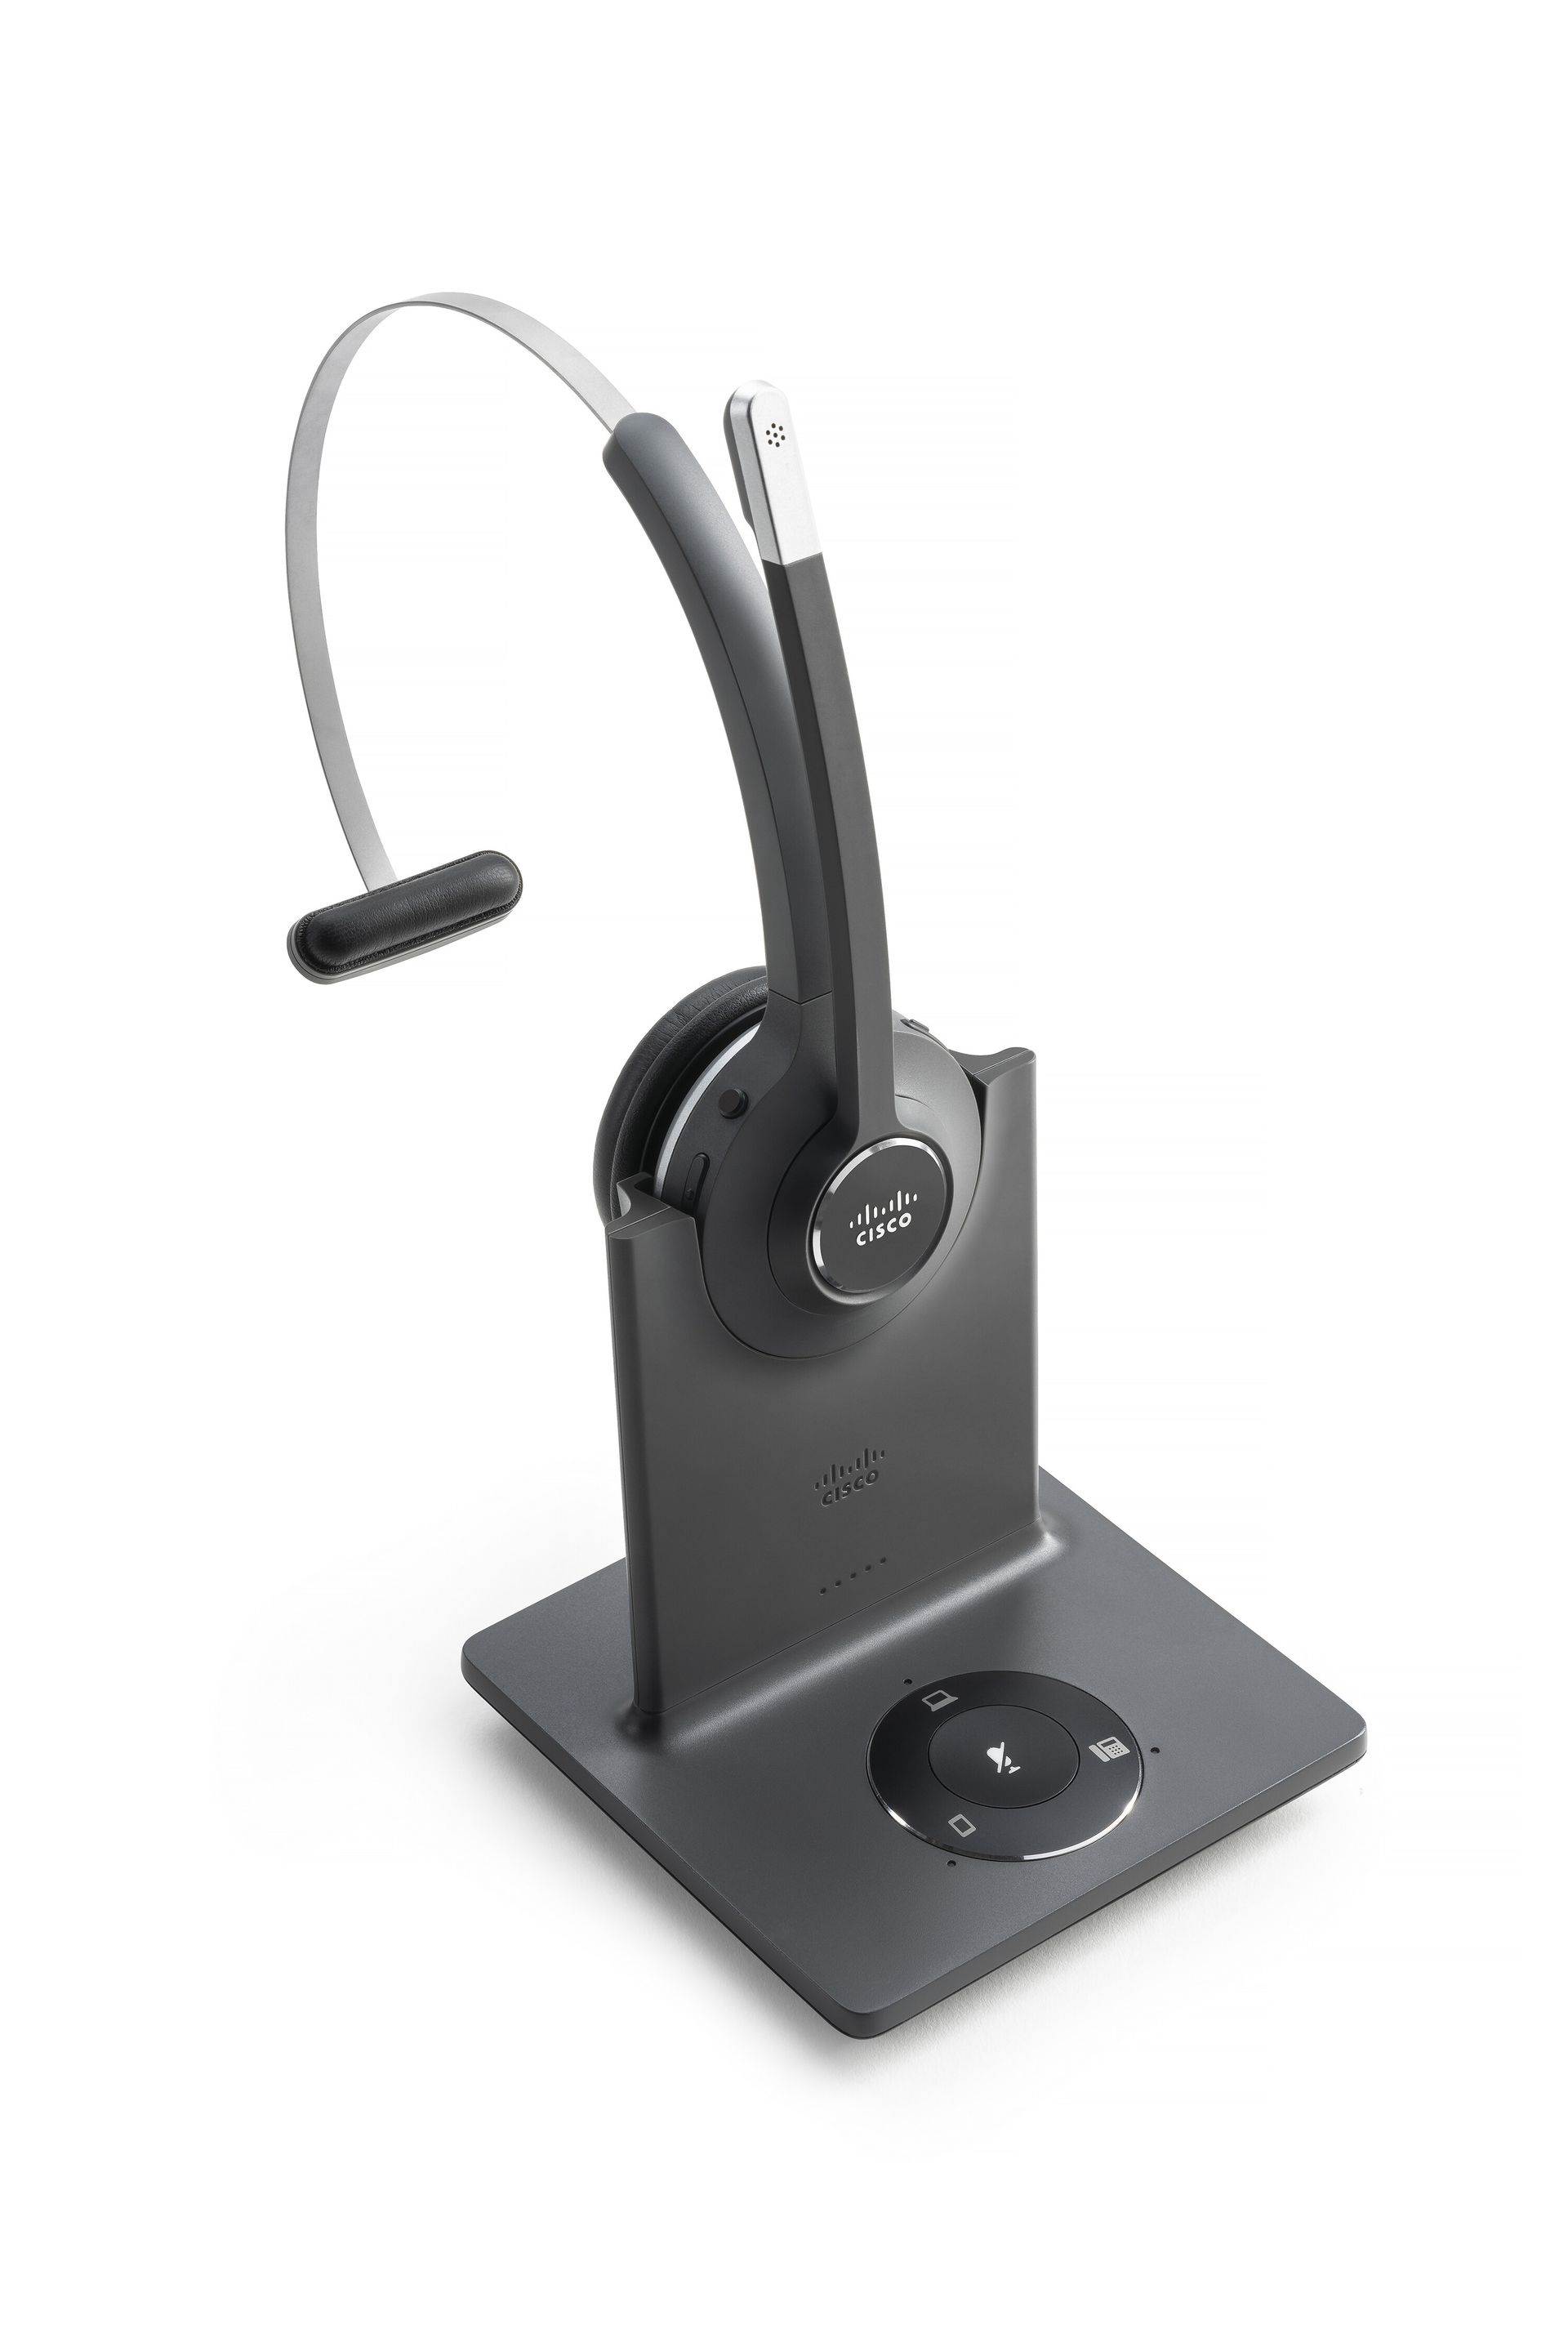 Cisco 500-series headset in charging stand